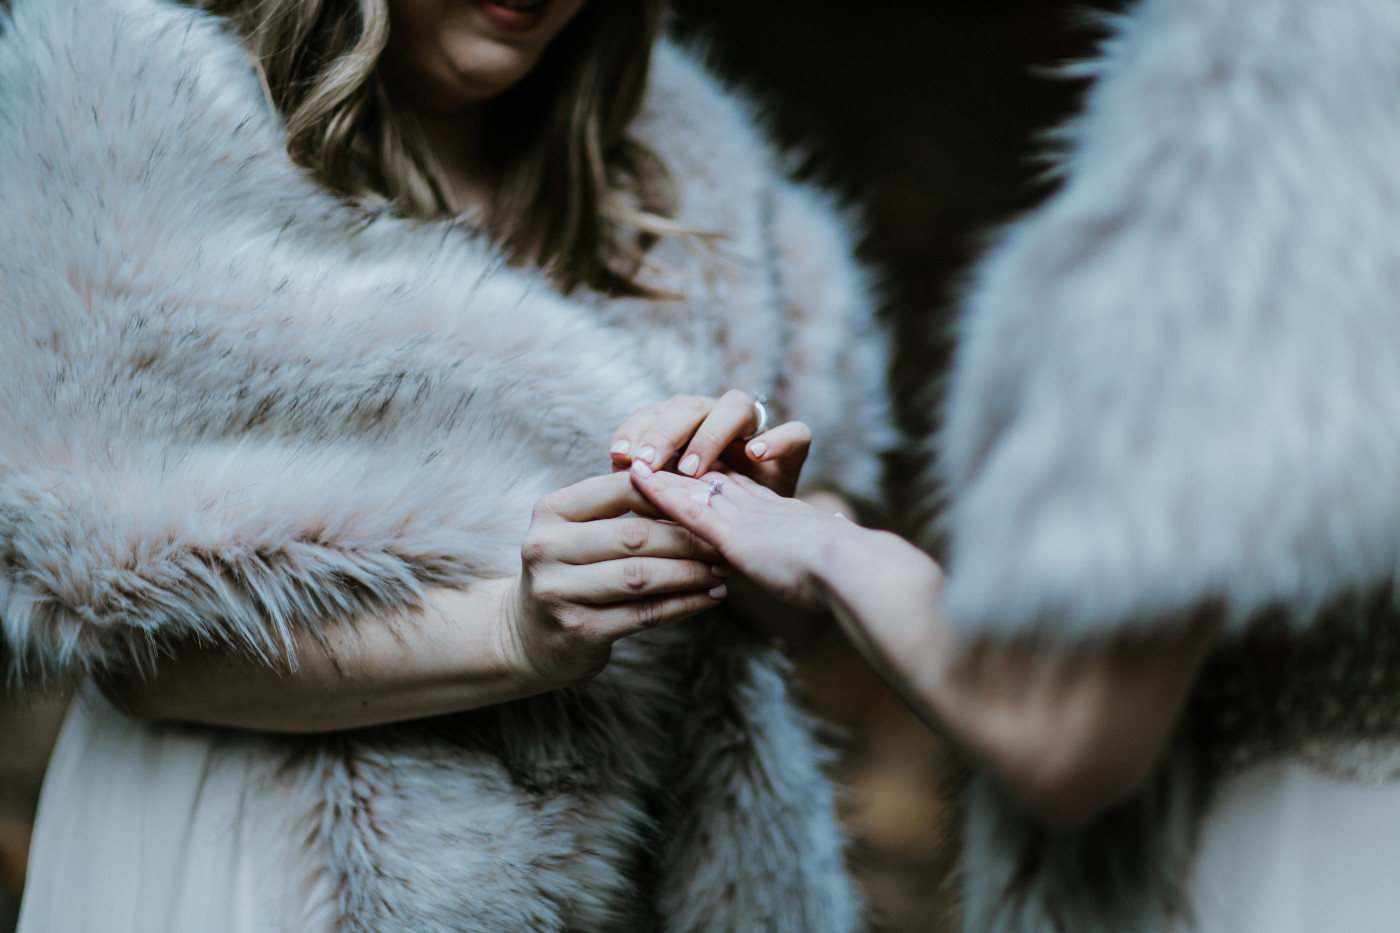 Hayley and Tiffany exchange their rings. Elopement photography at the Columbia River Gorge by Sienna Plus Josh.